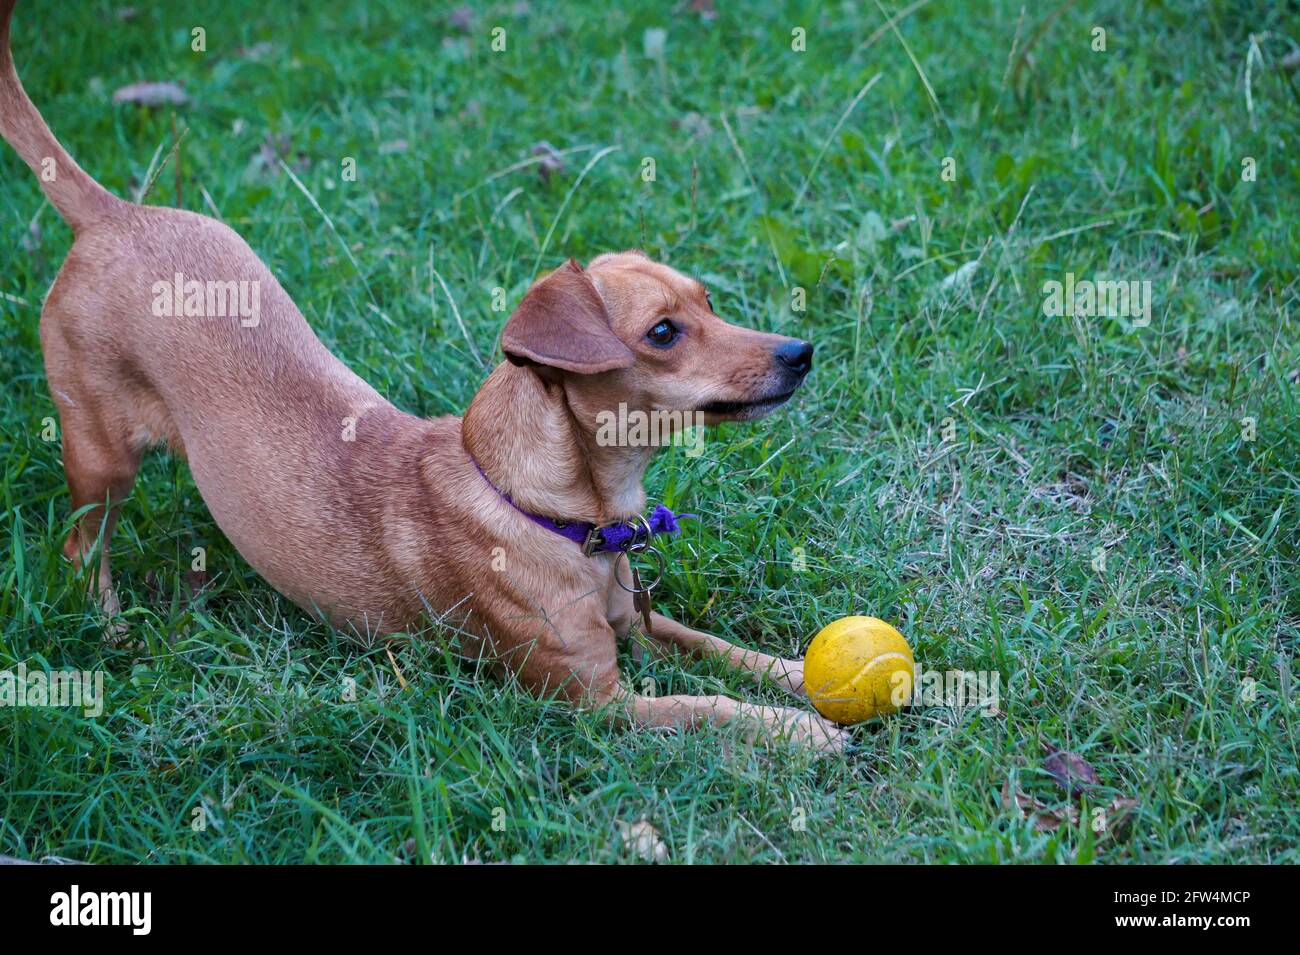 Small cute dog playing in a green grass garden with a yellow ball. Taken outdoor in a summer afternoon Stock Photo